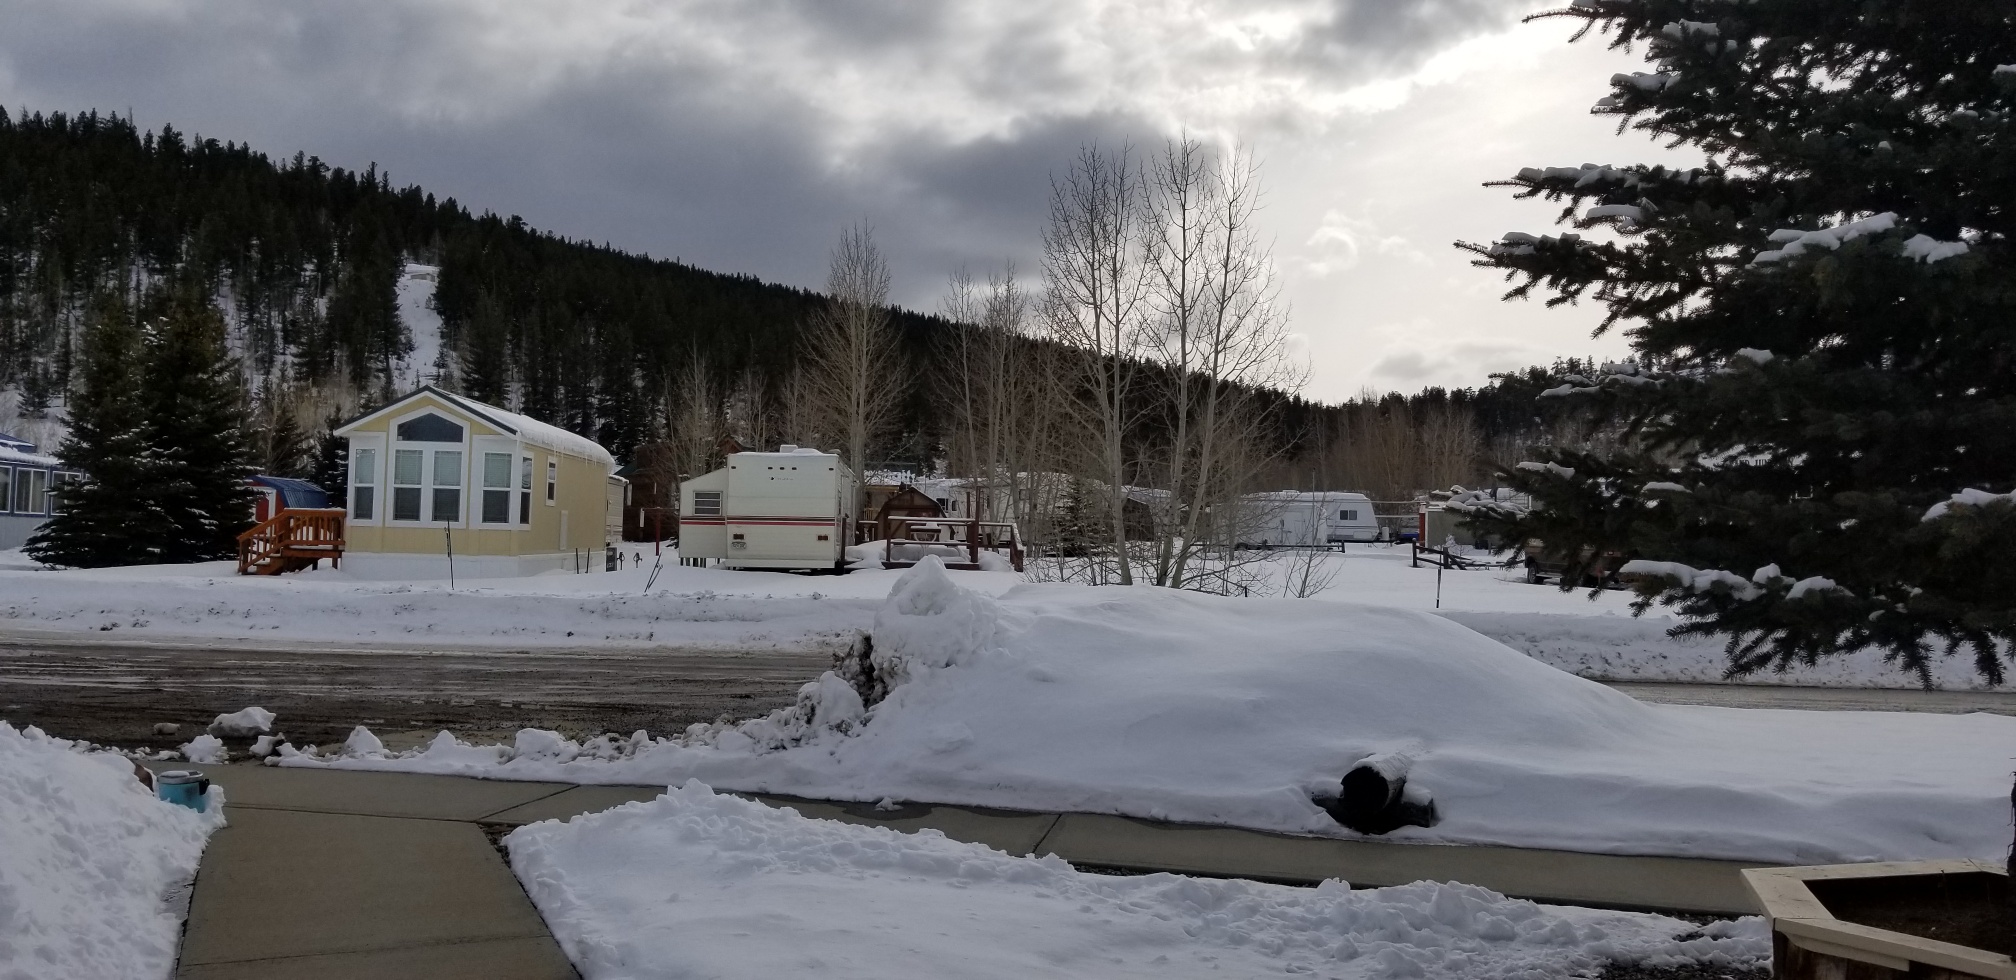 Campground of the Rockies Private RV Ranch located in Fairplay, Colorado